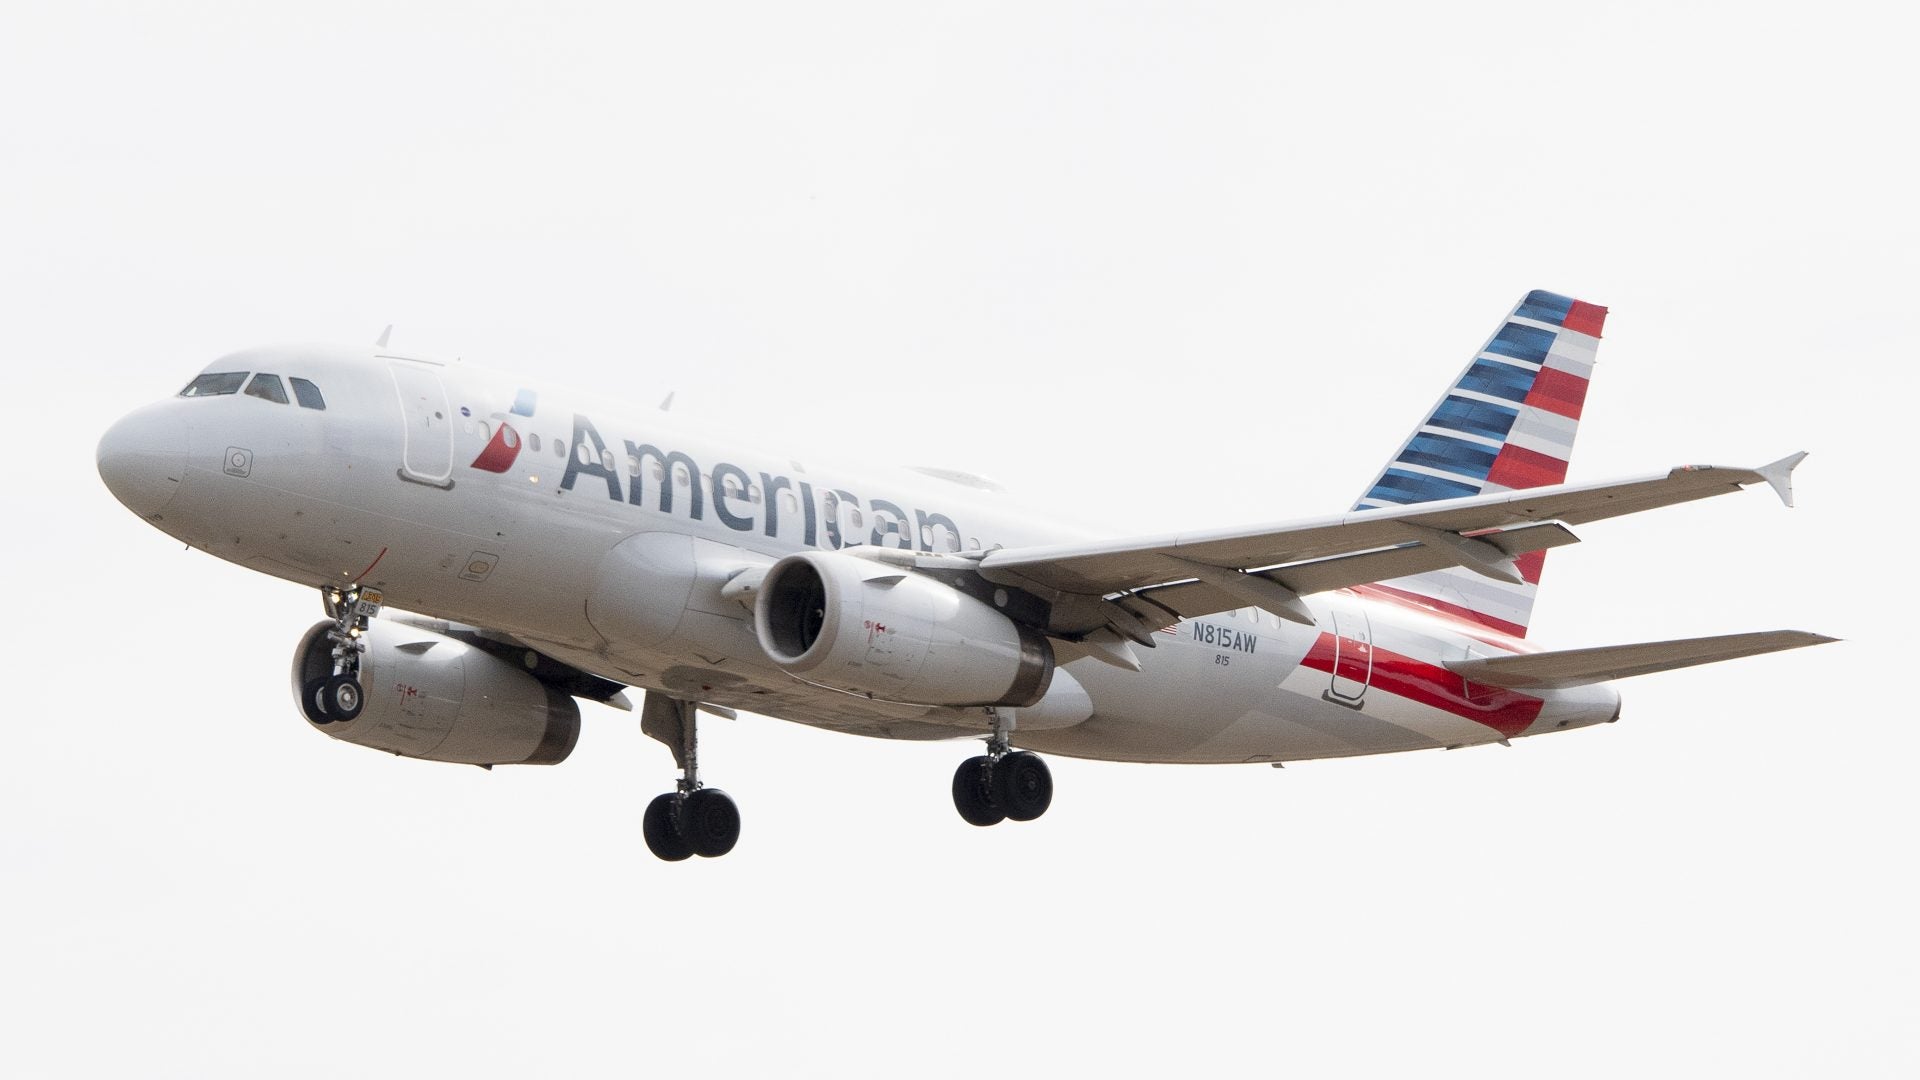 American Airlines Apologizes After Forcing Woman To 'Cover Up' Or Get Off The Flight